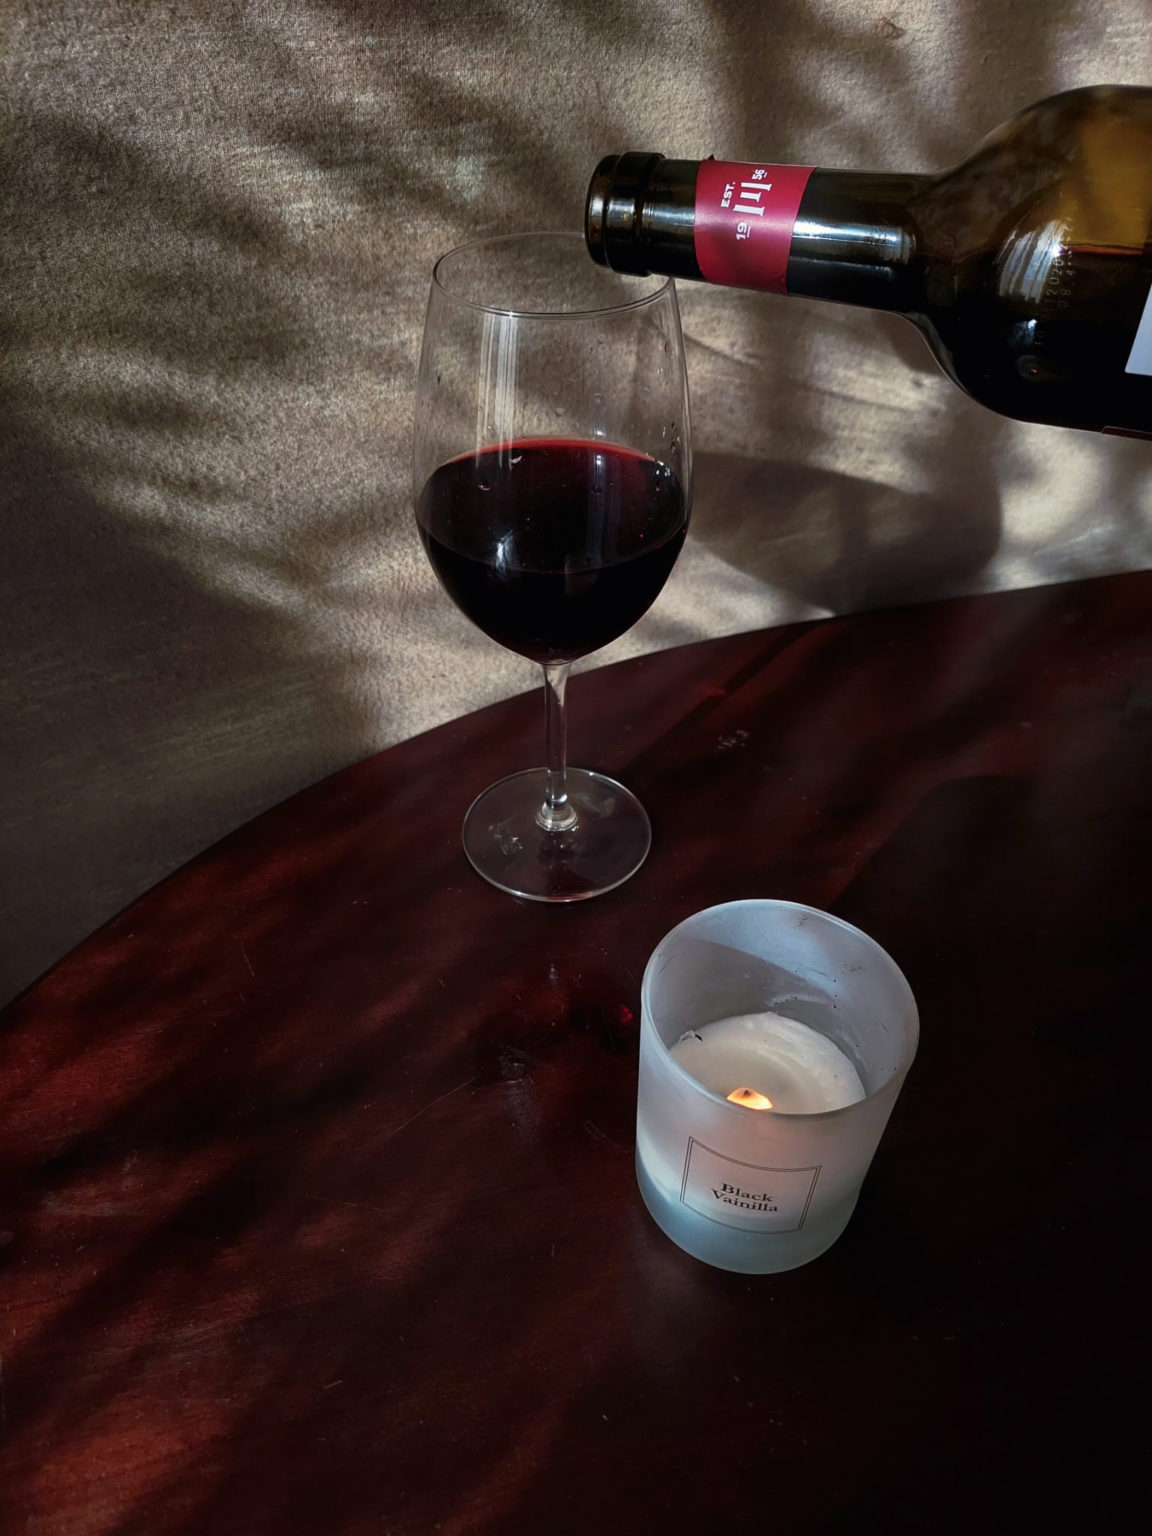 wine glass and a candle are on a table. the wine bottle is over the glass of wine because it finished pouring